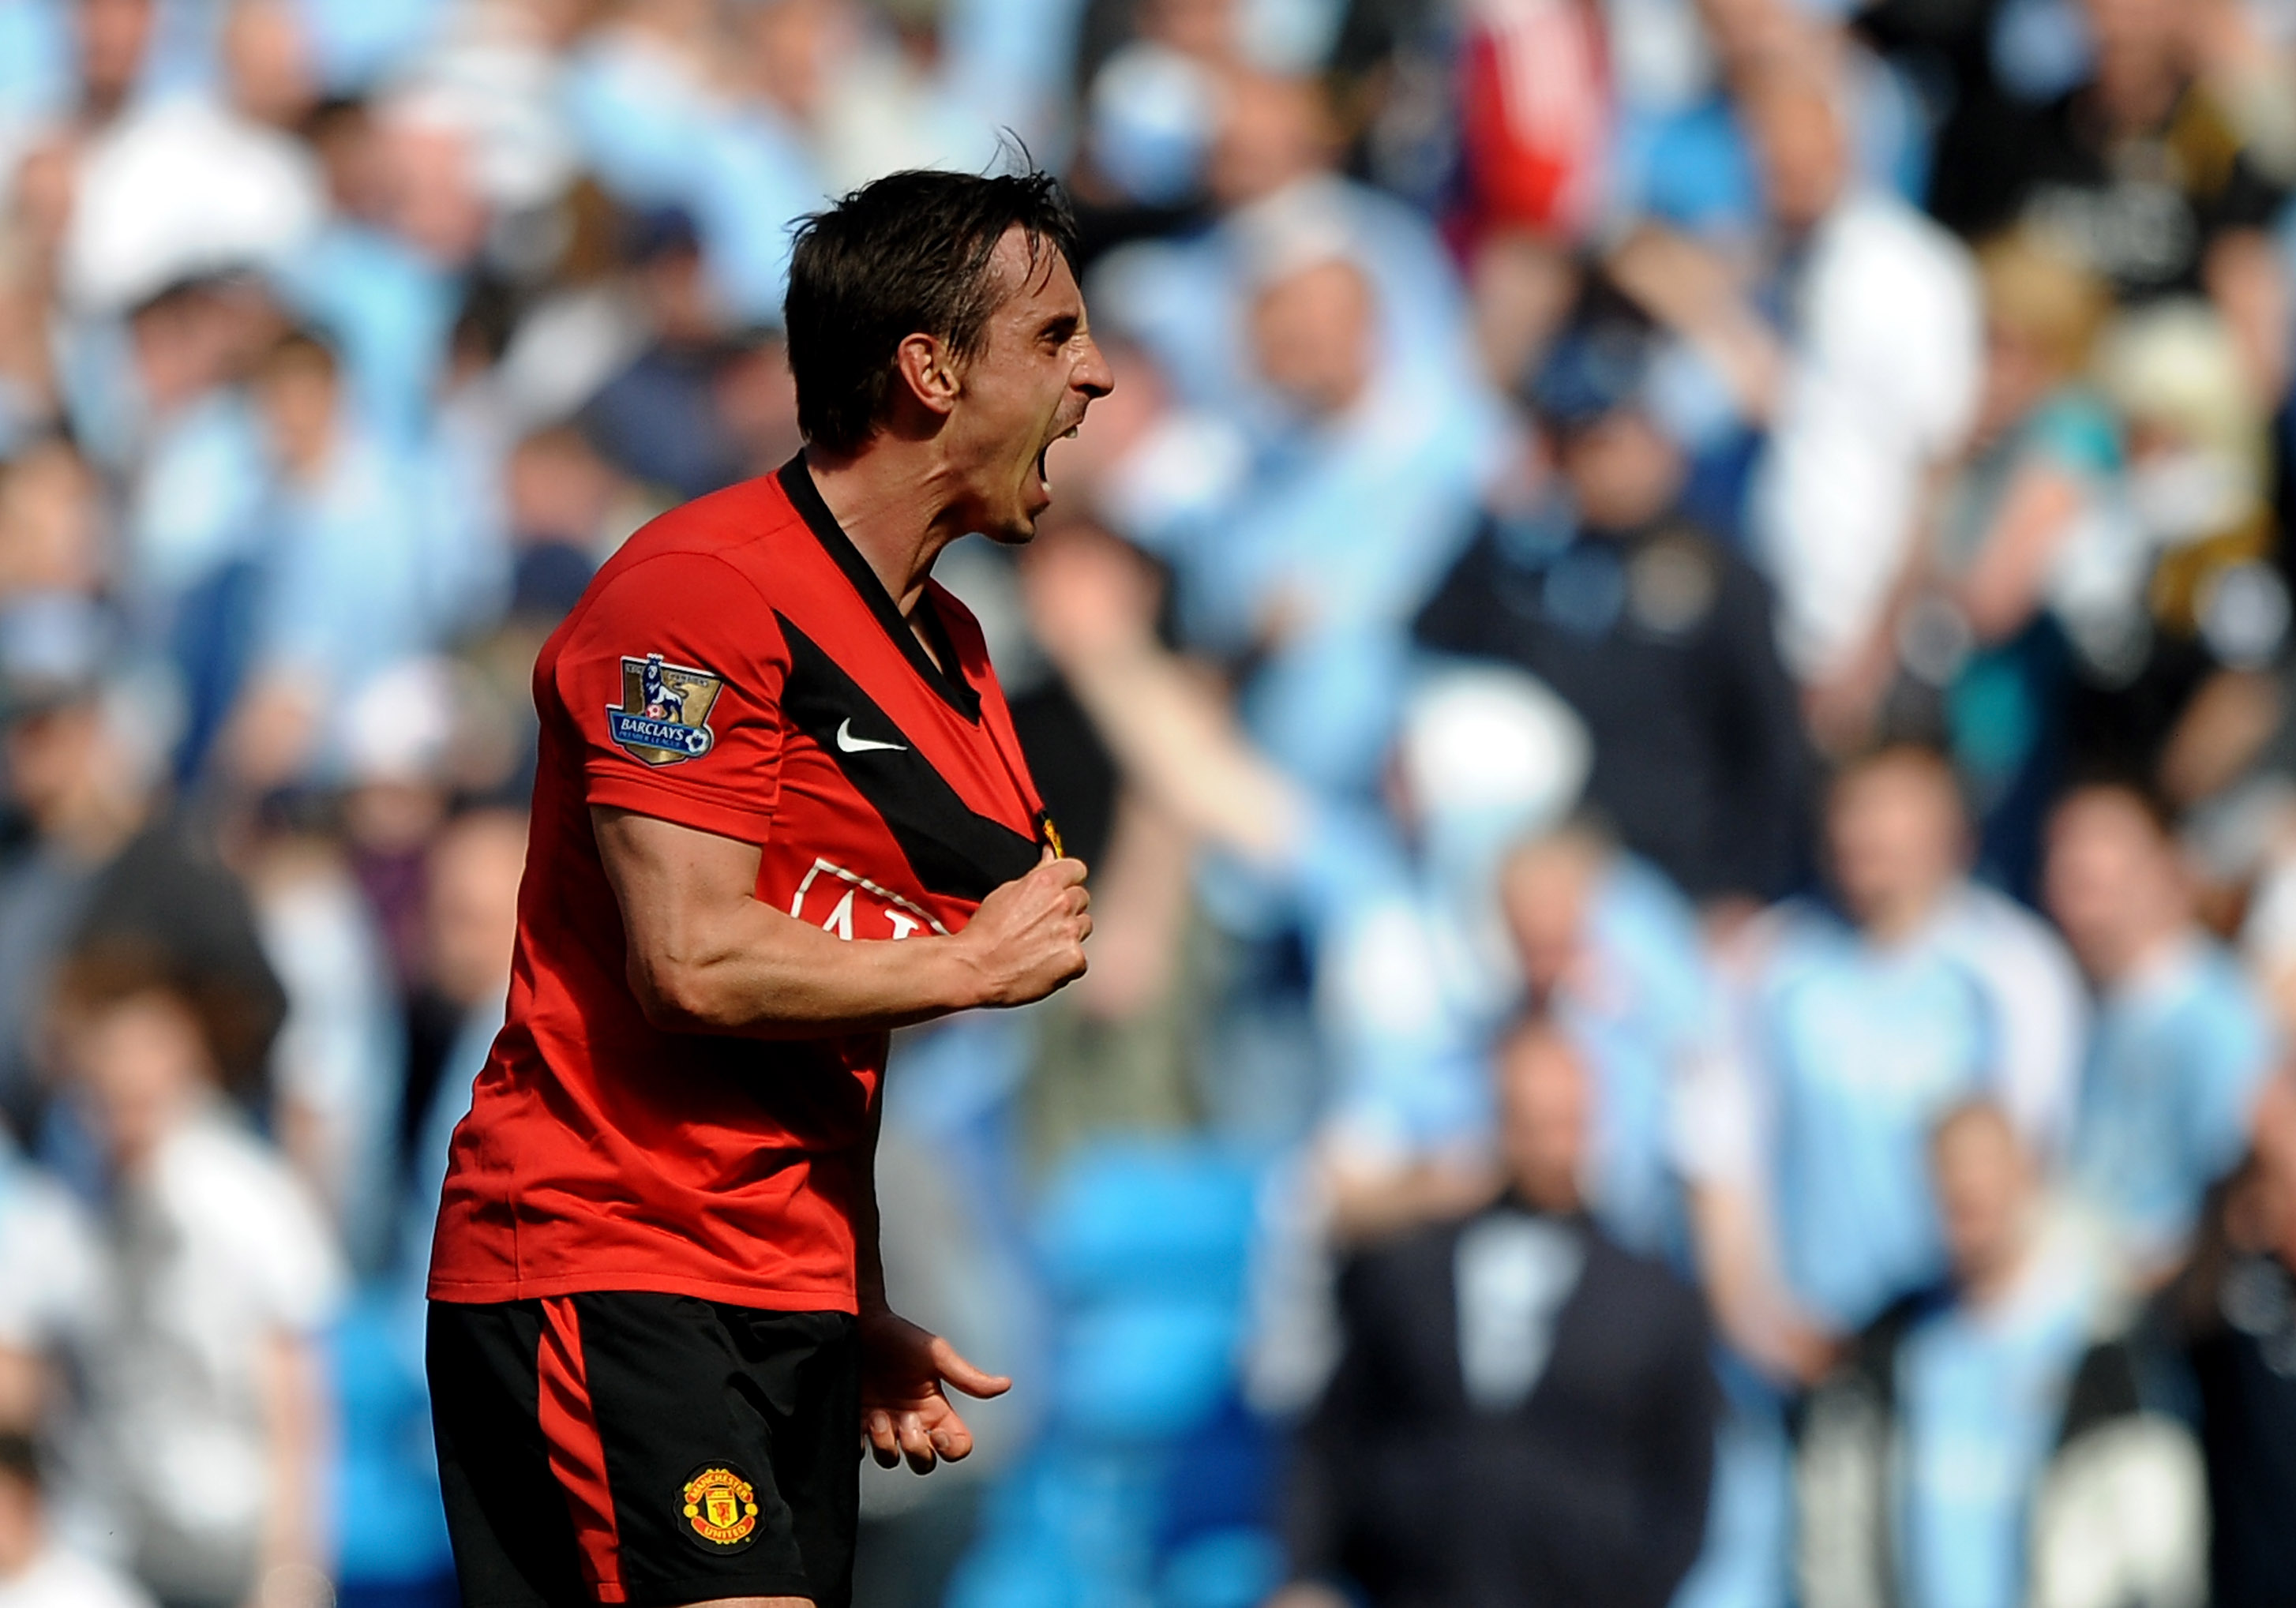 MANCHESTER, ENGLAND - APRIL 17:  Gary Neville of Manchester United celebrates at the end of  the Barclays Premier League match between Manchester City and Manchester United at the City of Manchester Stadium on April 17, 2010 in Manchester, England.  (Phot